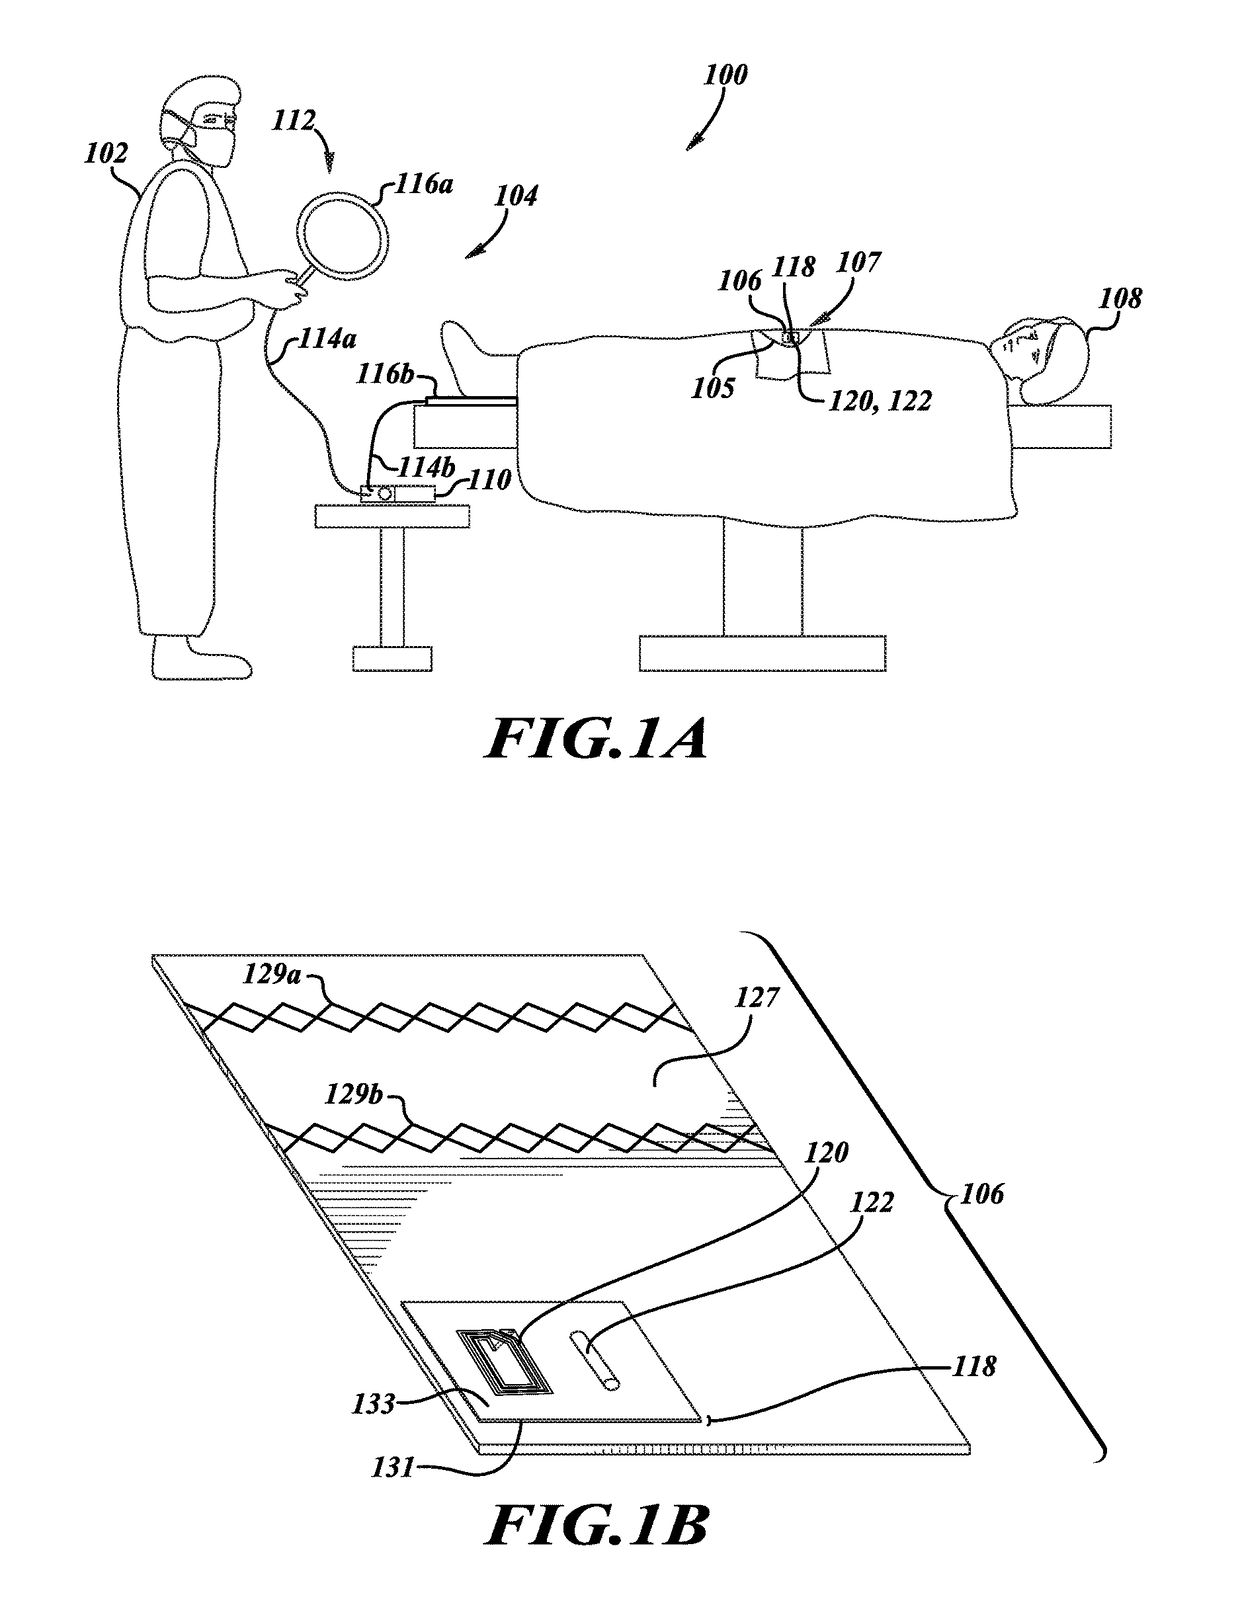 Sterilizable wirelessly detectable objects for use in medical procedures and methods of making same